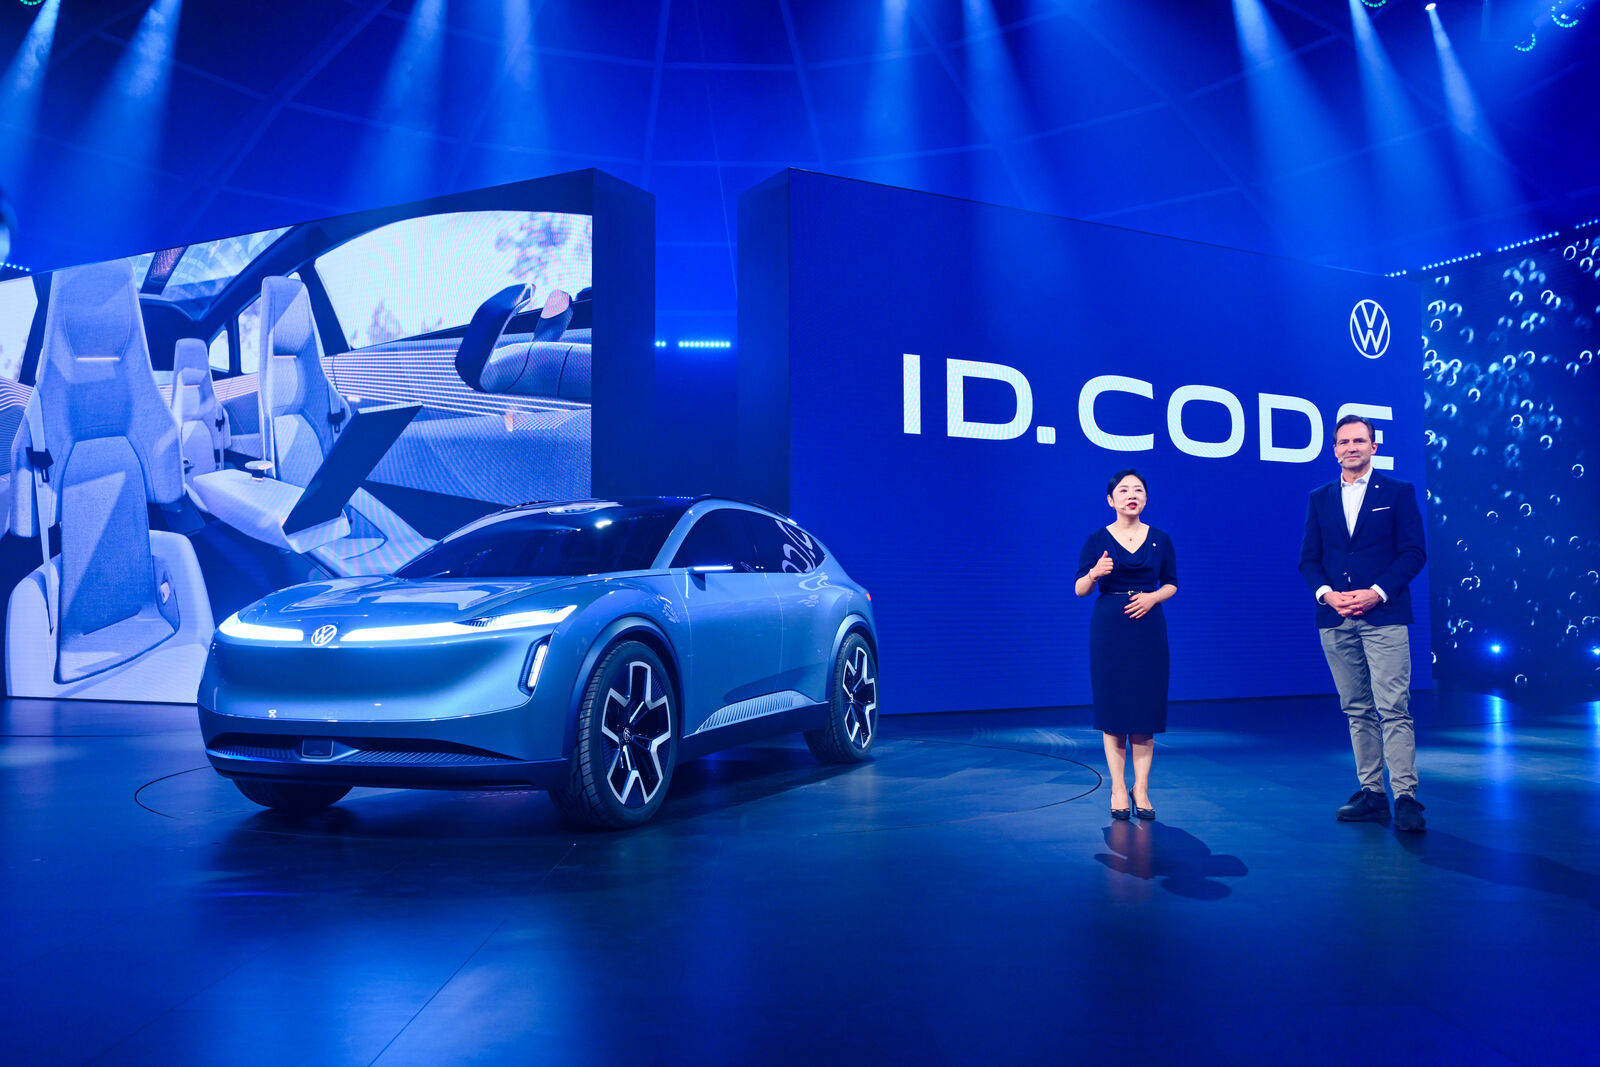 A metallic blue Volkswagen ID. Code SUV concept is displayed under bright blue lighting in a futuristic exhibition space.